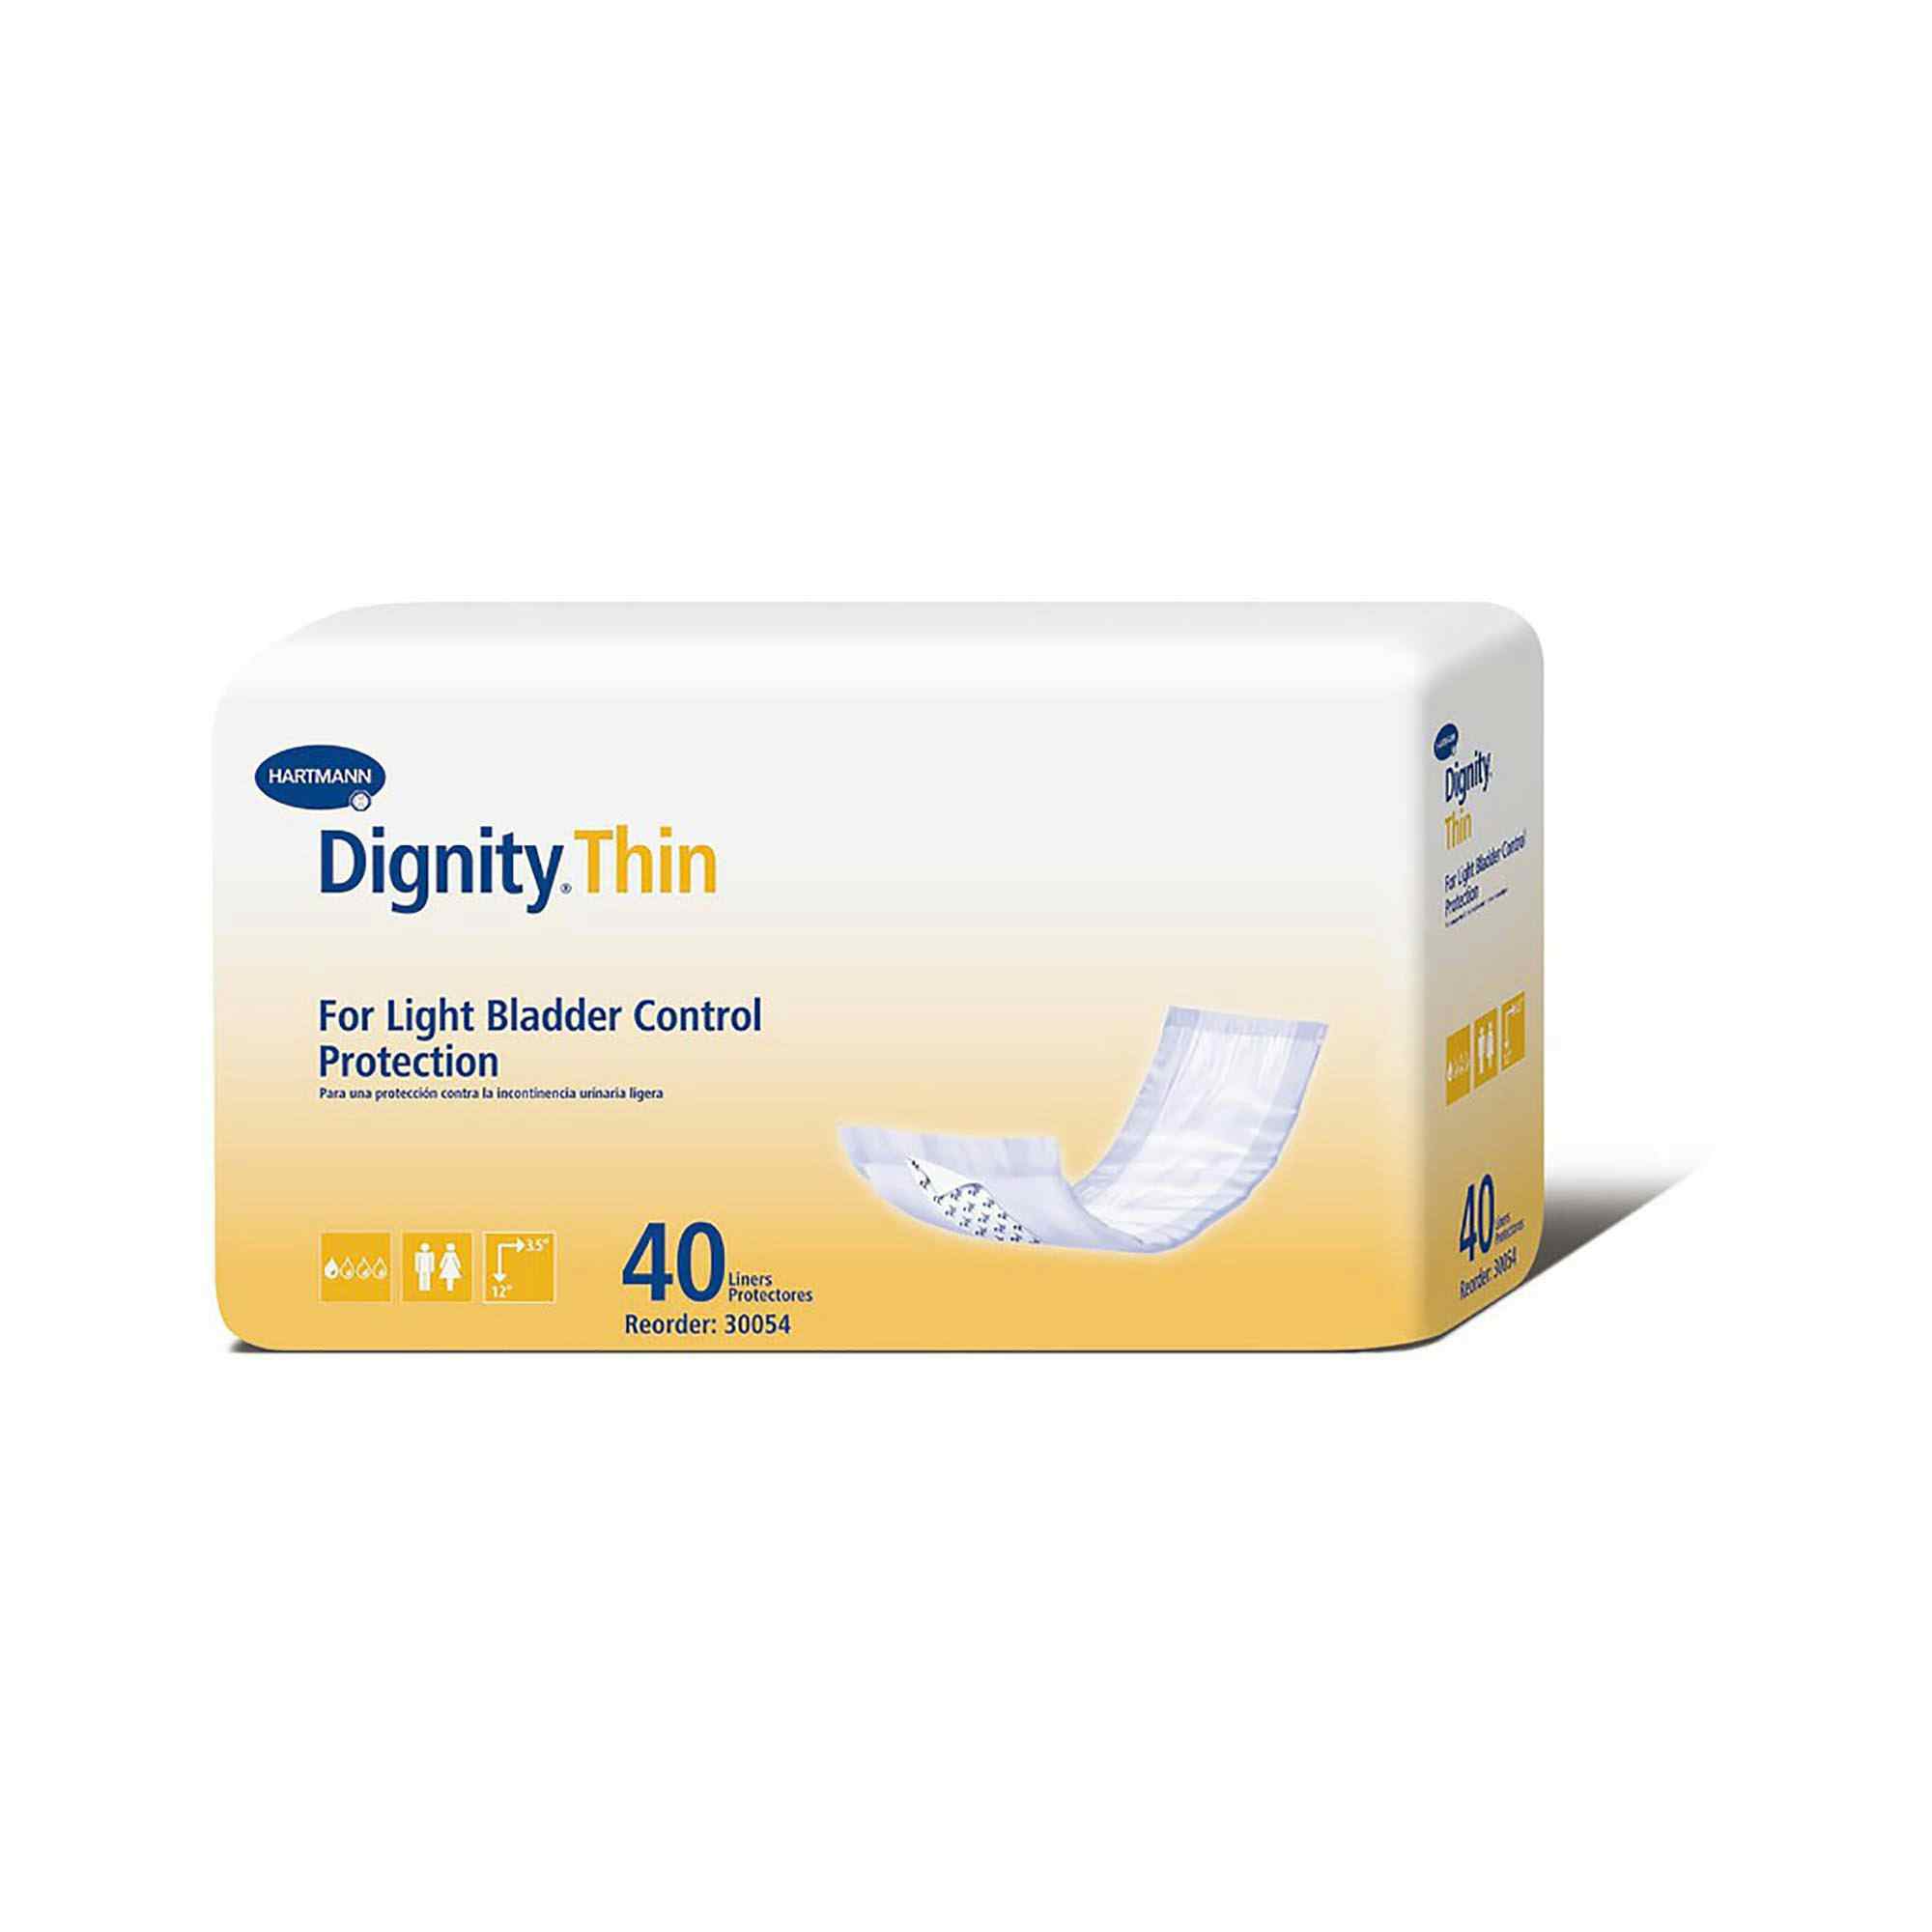 Dignity Thin Adult Unisex Disposable Bladder Control Pad, Light Absorbency, 30054, Green - One Size Fits Most - Case of 240 Pads (6 Bags)